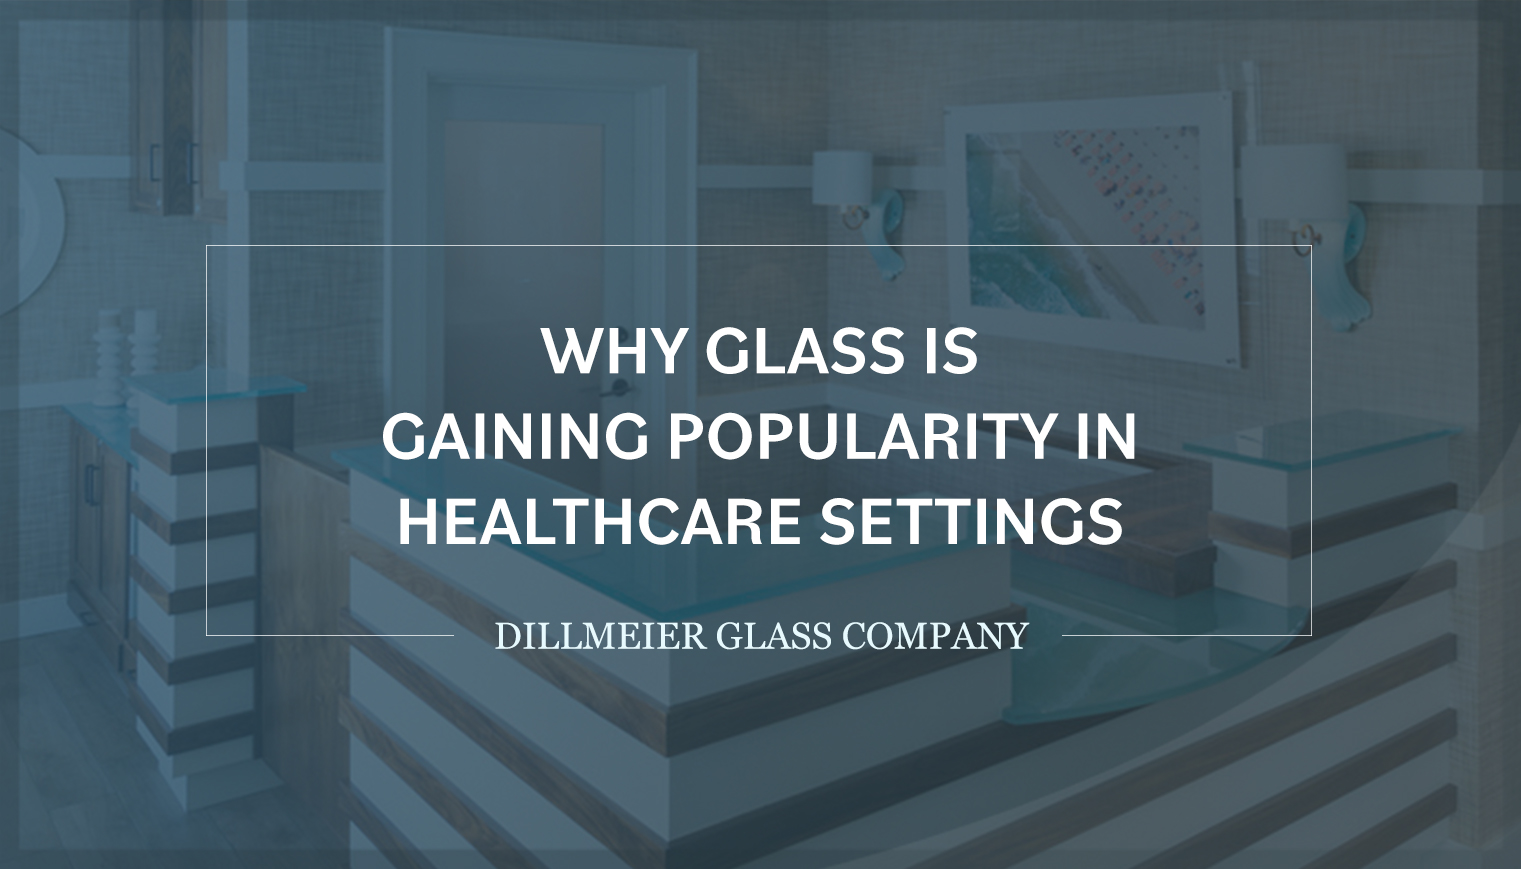 Why Glass Is Gaining Popularity in Healthcare Settings